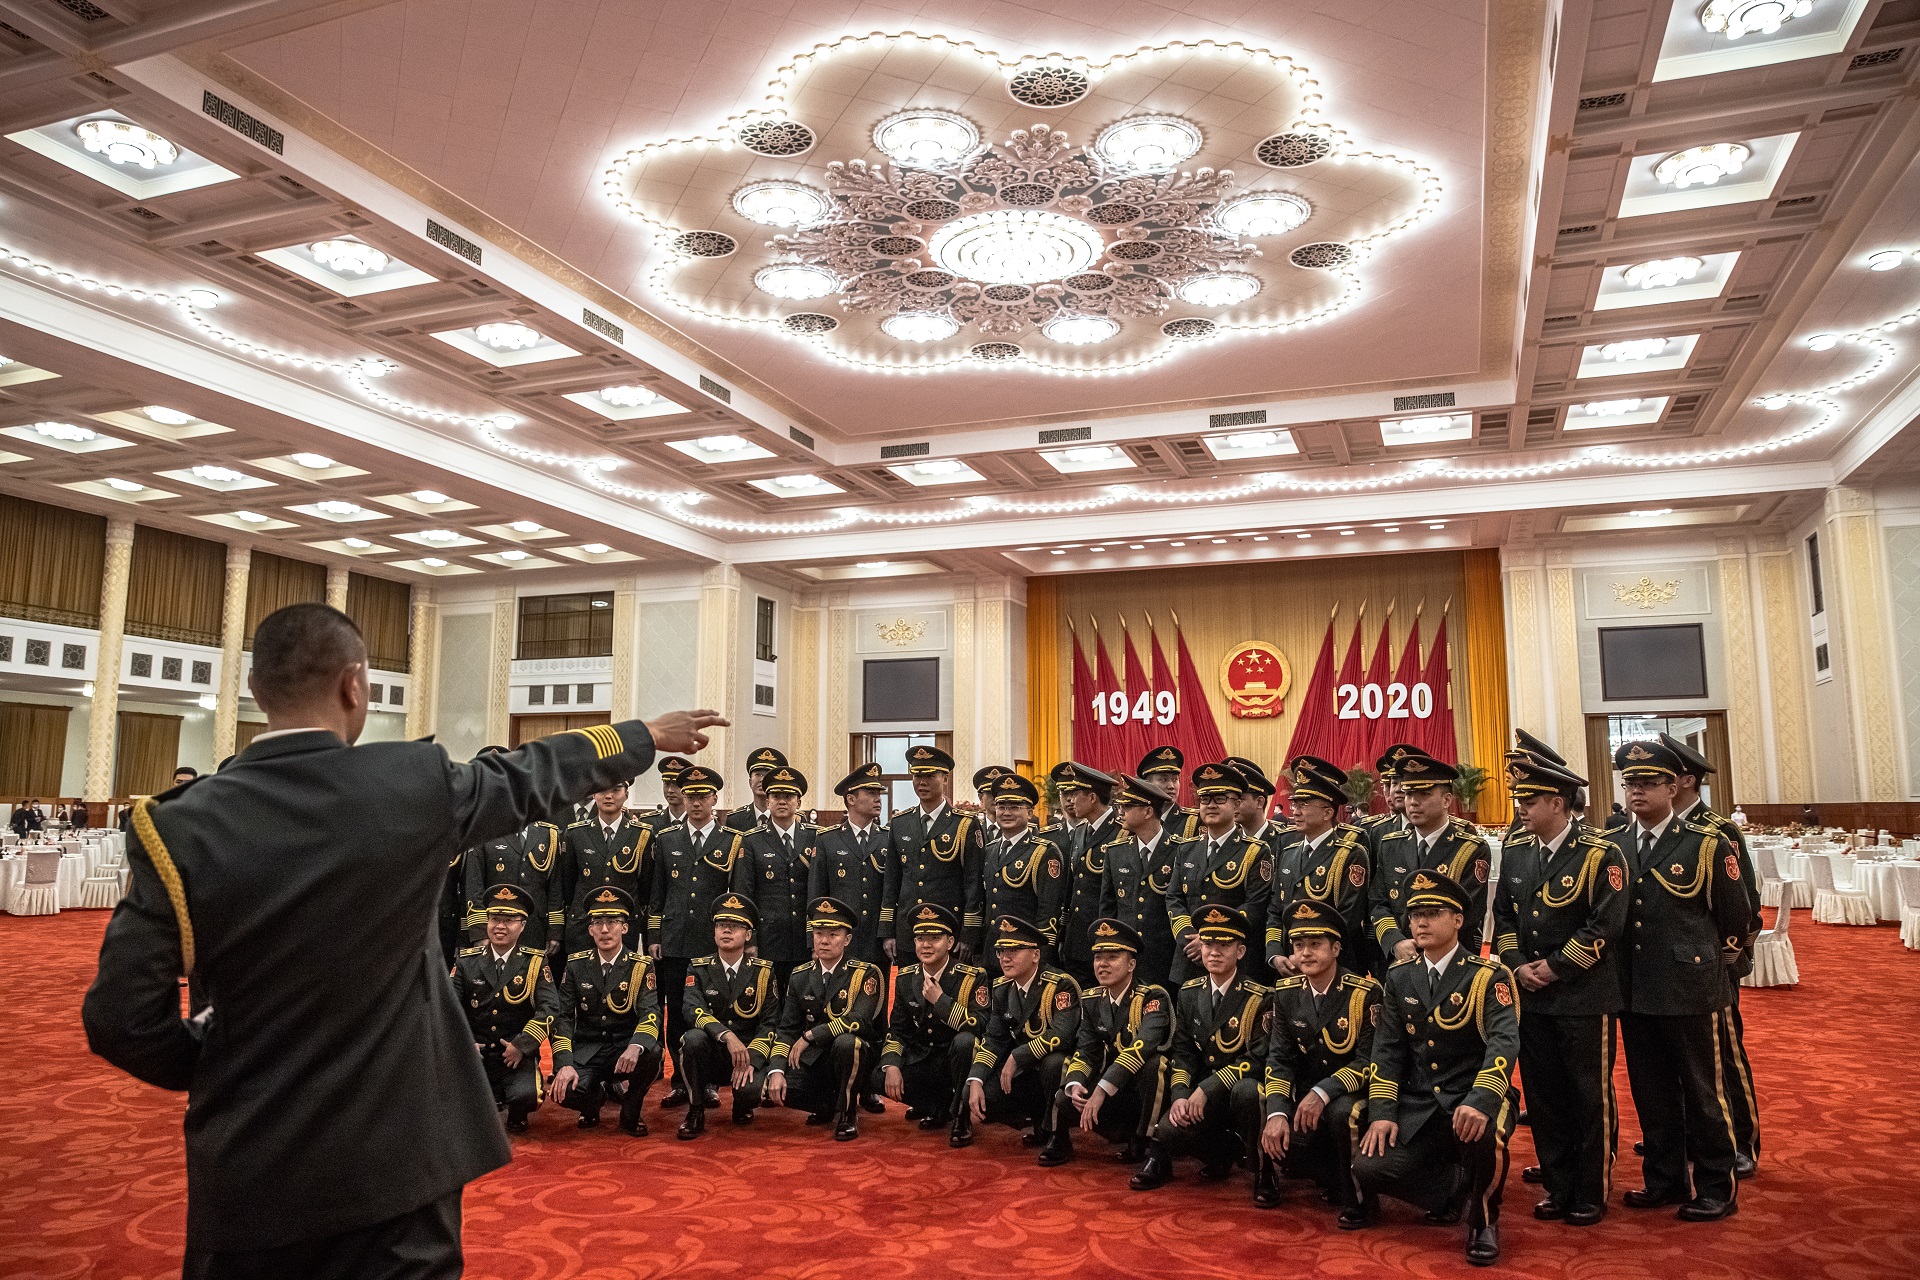 epa08708280 Chinese military orchestra gather for a group photos before performing during the National Day reception in a banquet hall at the Great Hall of the People (GHOP) in Beijing, China, 30 September 2020. China celebrates its National Day on 01 October, marking its 71st founding anniversary.  EPA/ROMAN PILIPEY